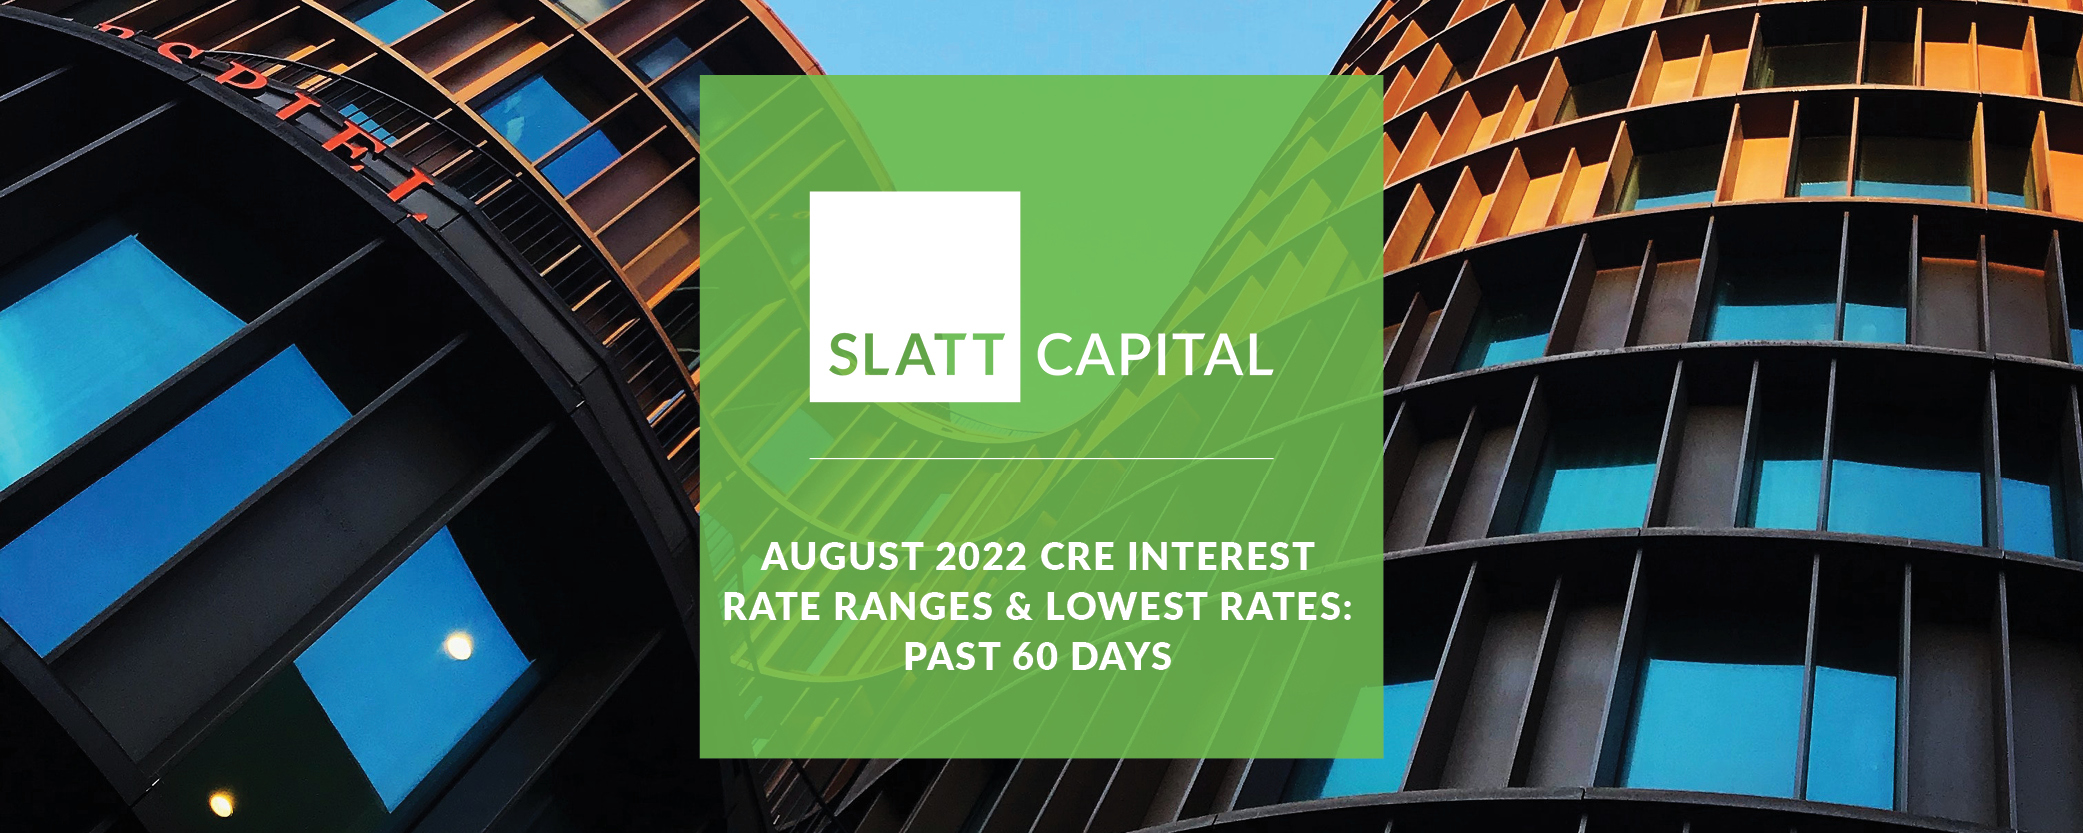 August 2022 cre interest rate ranges & lowest rates: past 60 days